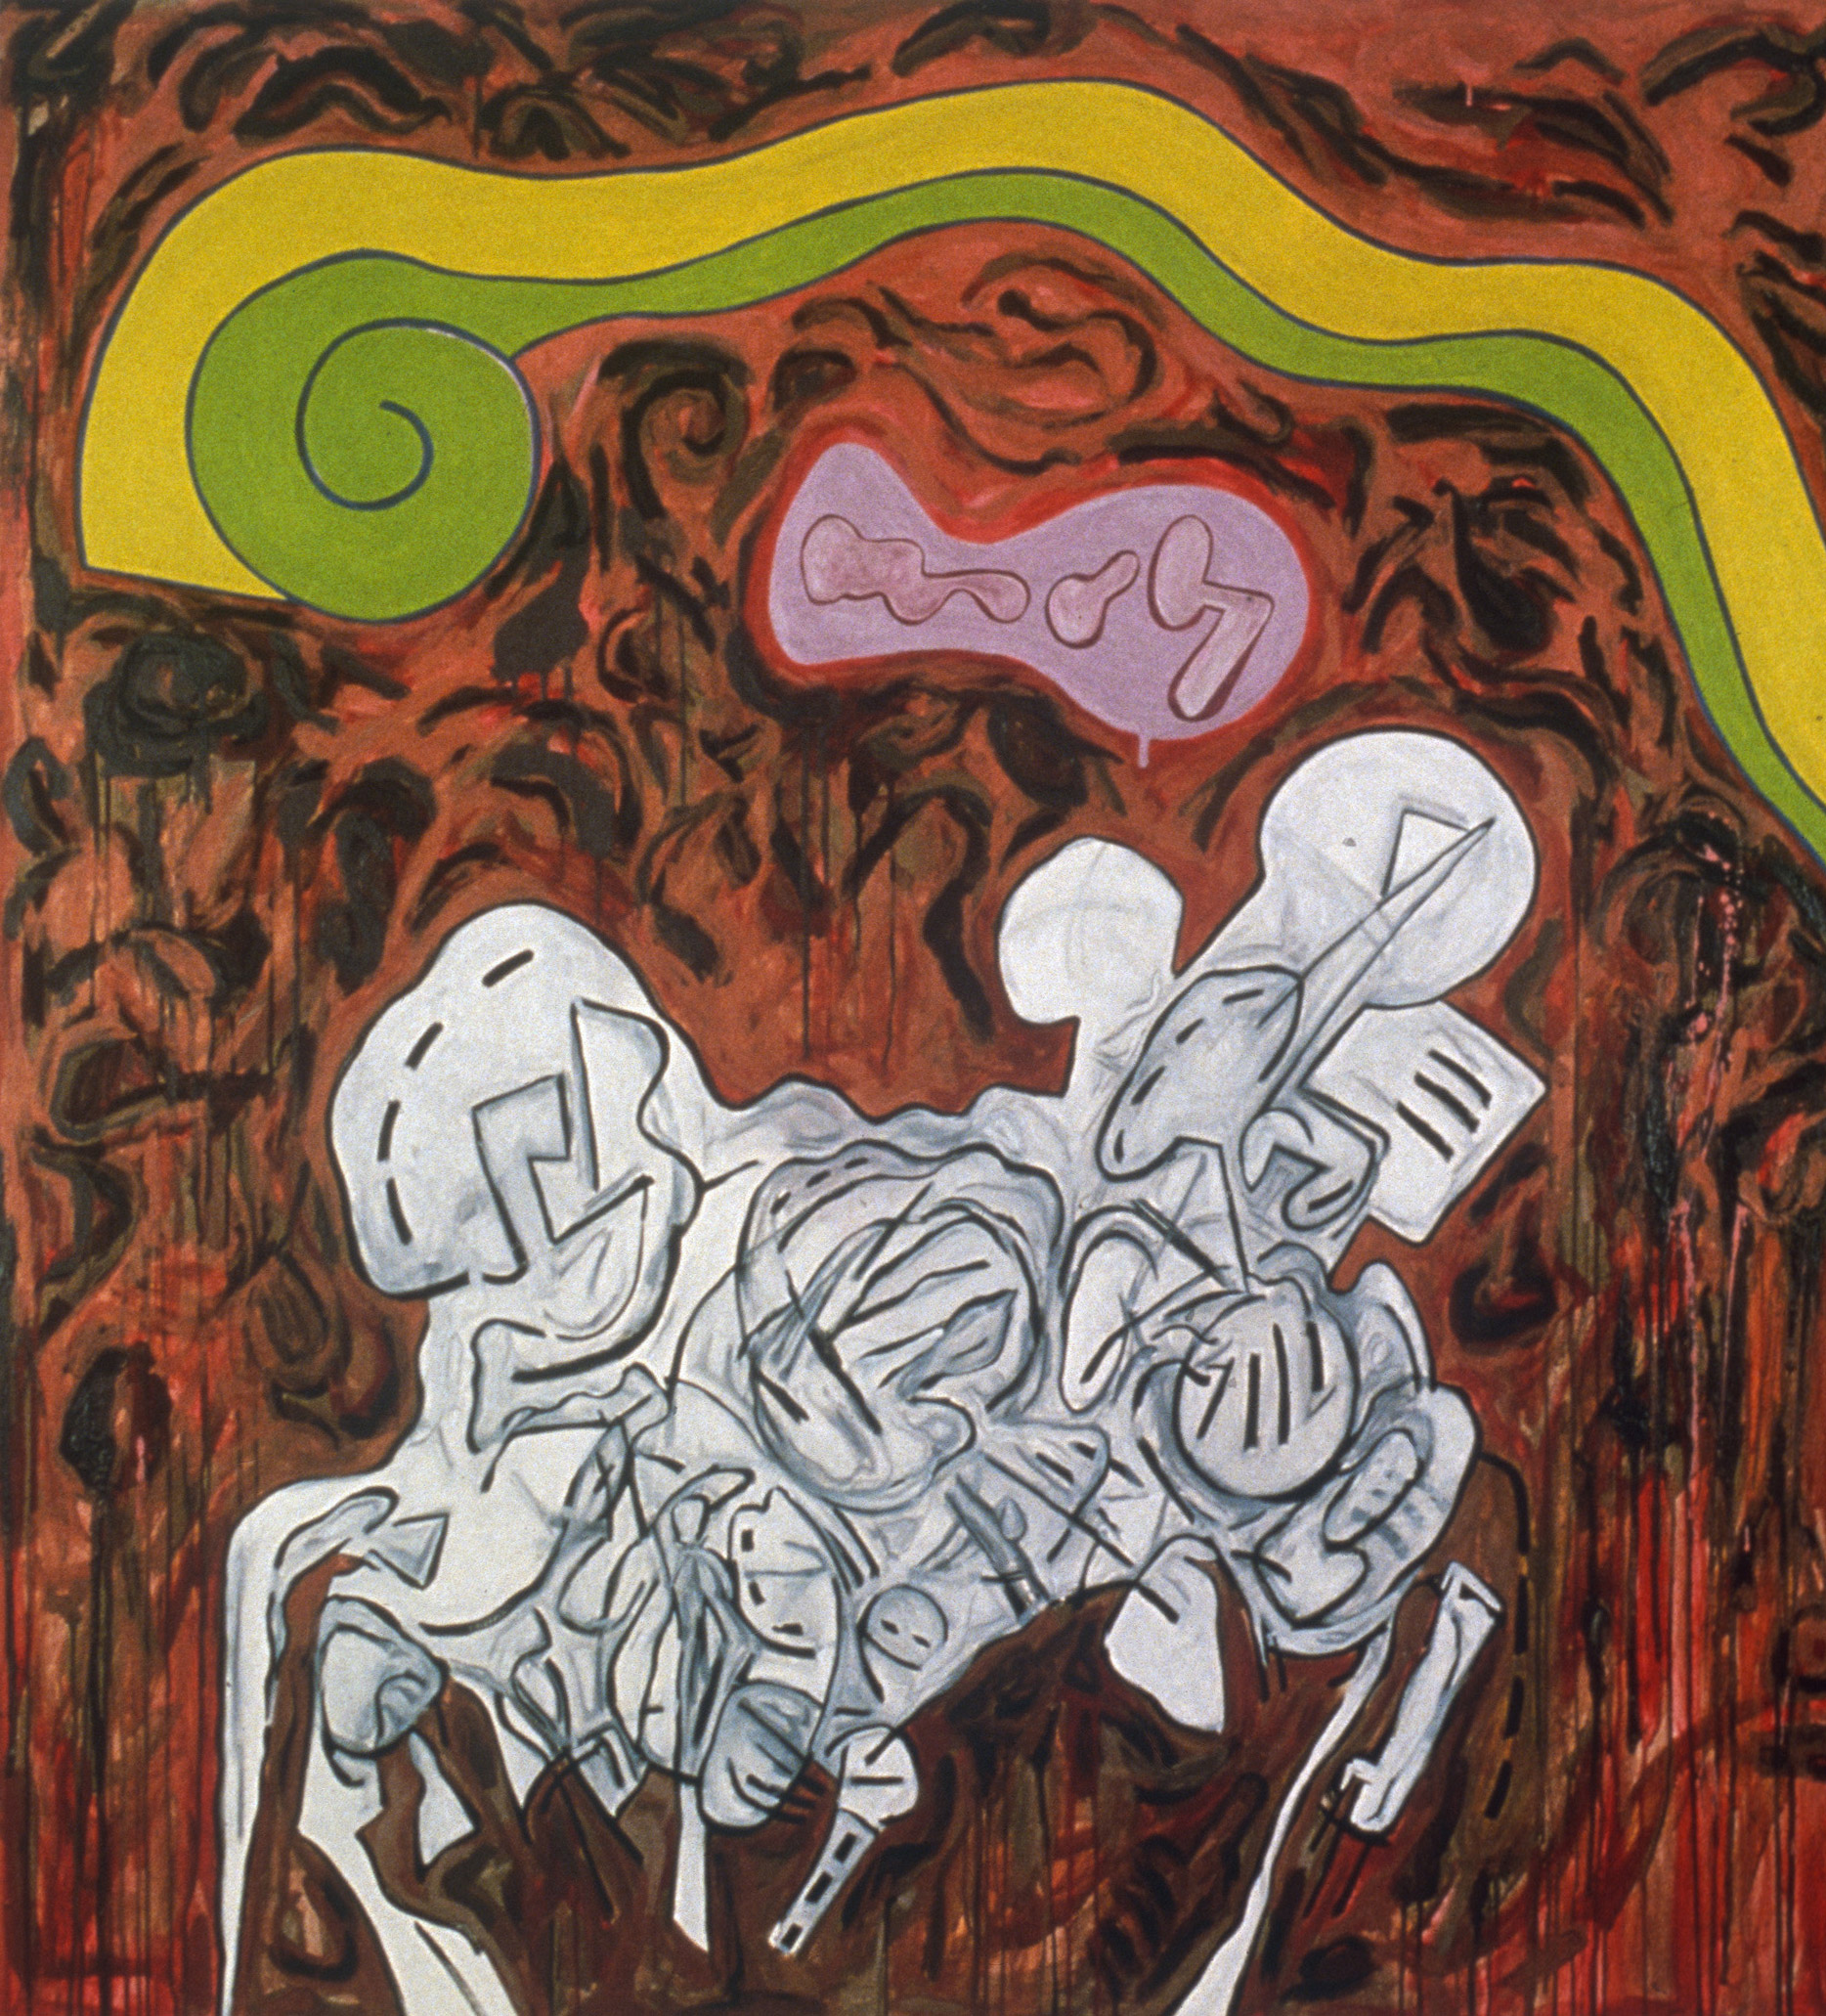 Time-Step, 1990 | 72” x 66” | Oil & Acrylic on Canvas | Collection of The Neuberger Museum of Art, Purchase, New York